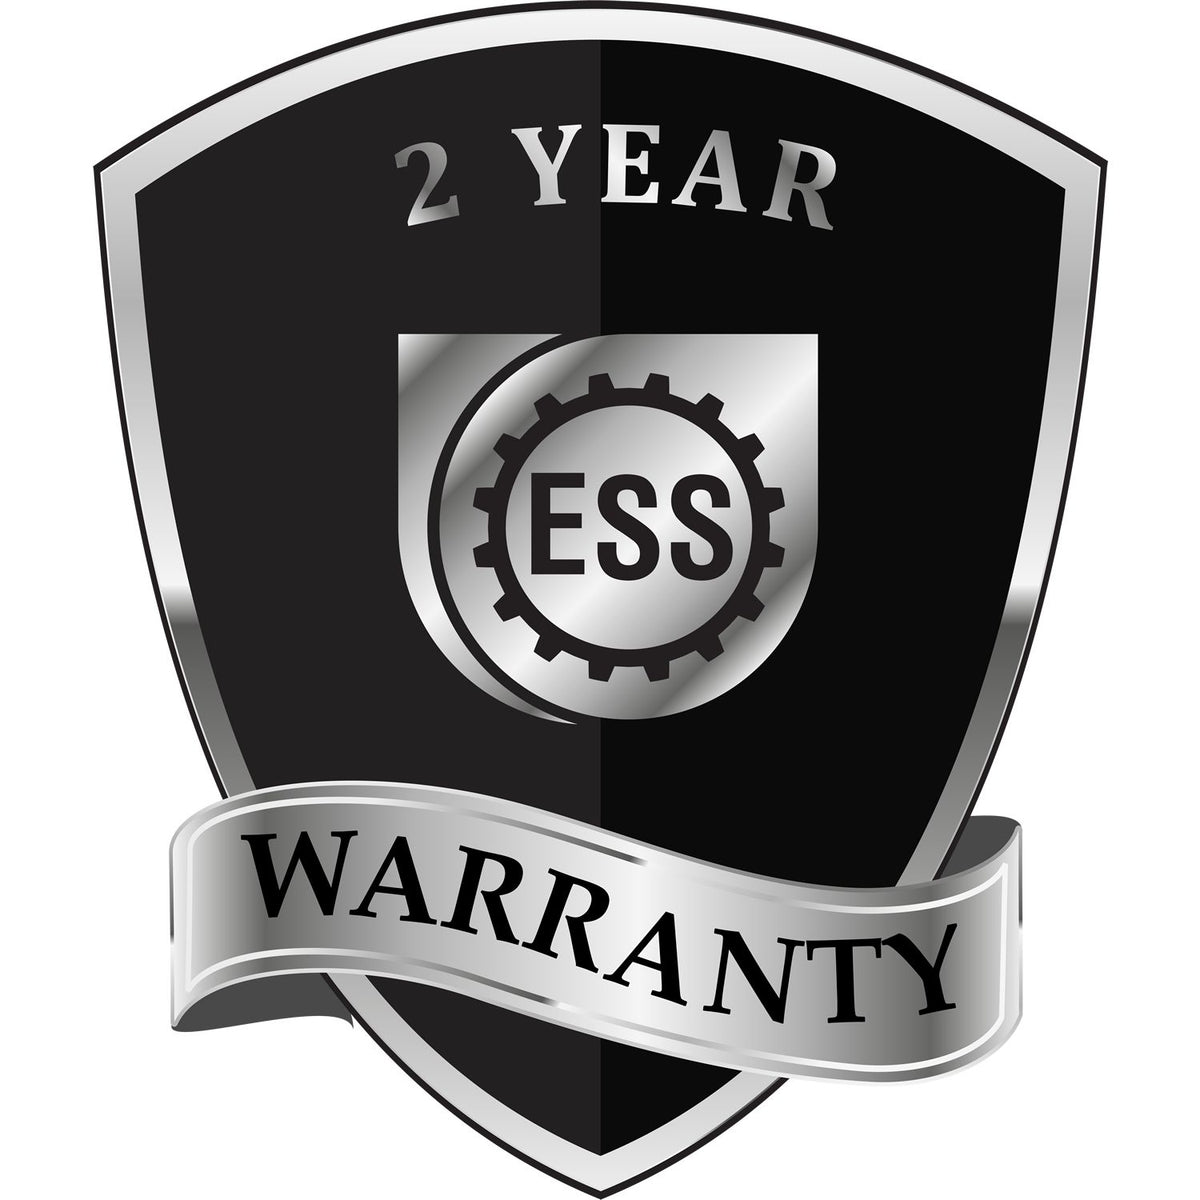 A black and silver badge or emblem showing warranty information for the Handheld Montana Professional Geologist Embosser